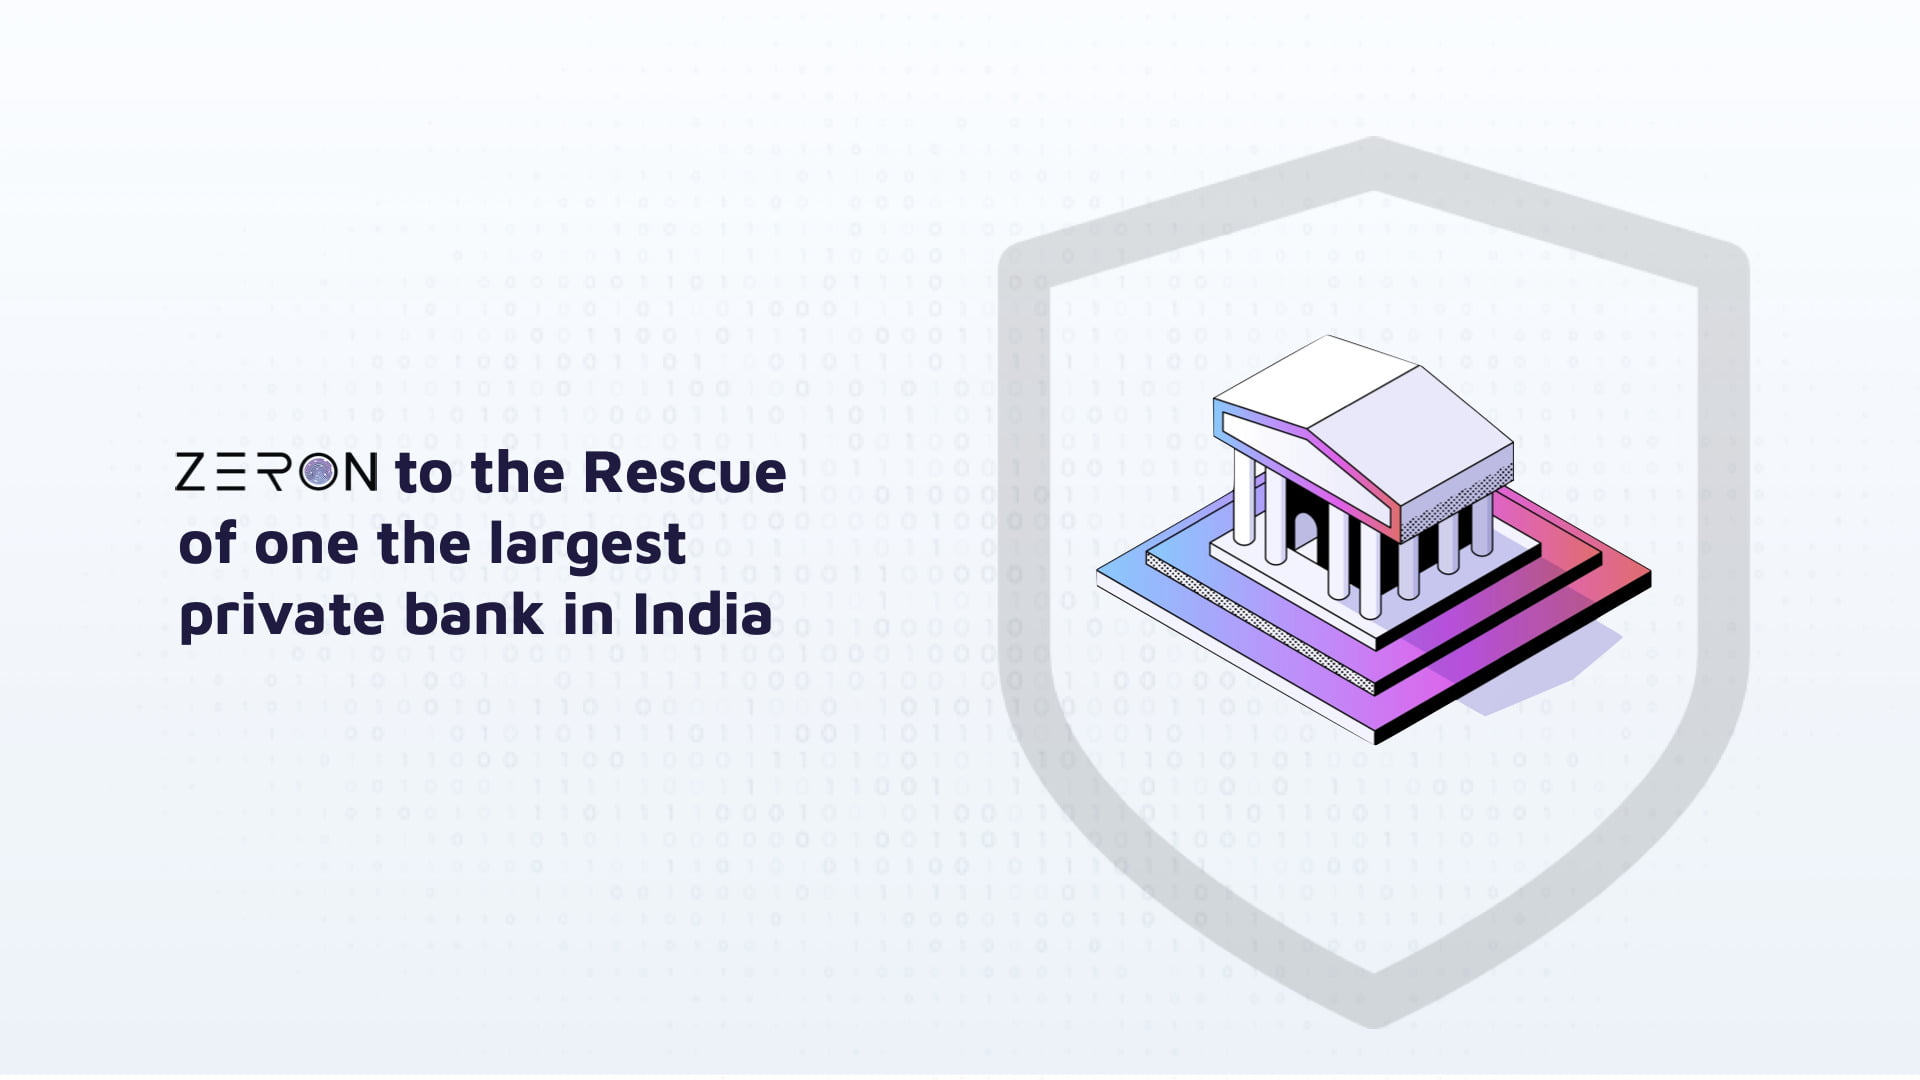 A data breach from the biggest private bank in India – Zeron to the rescue.